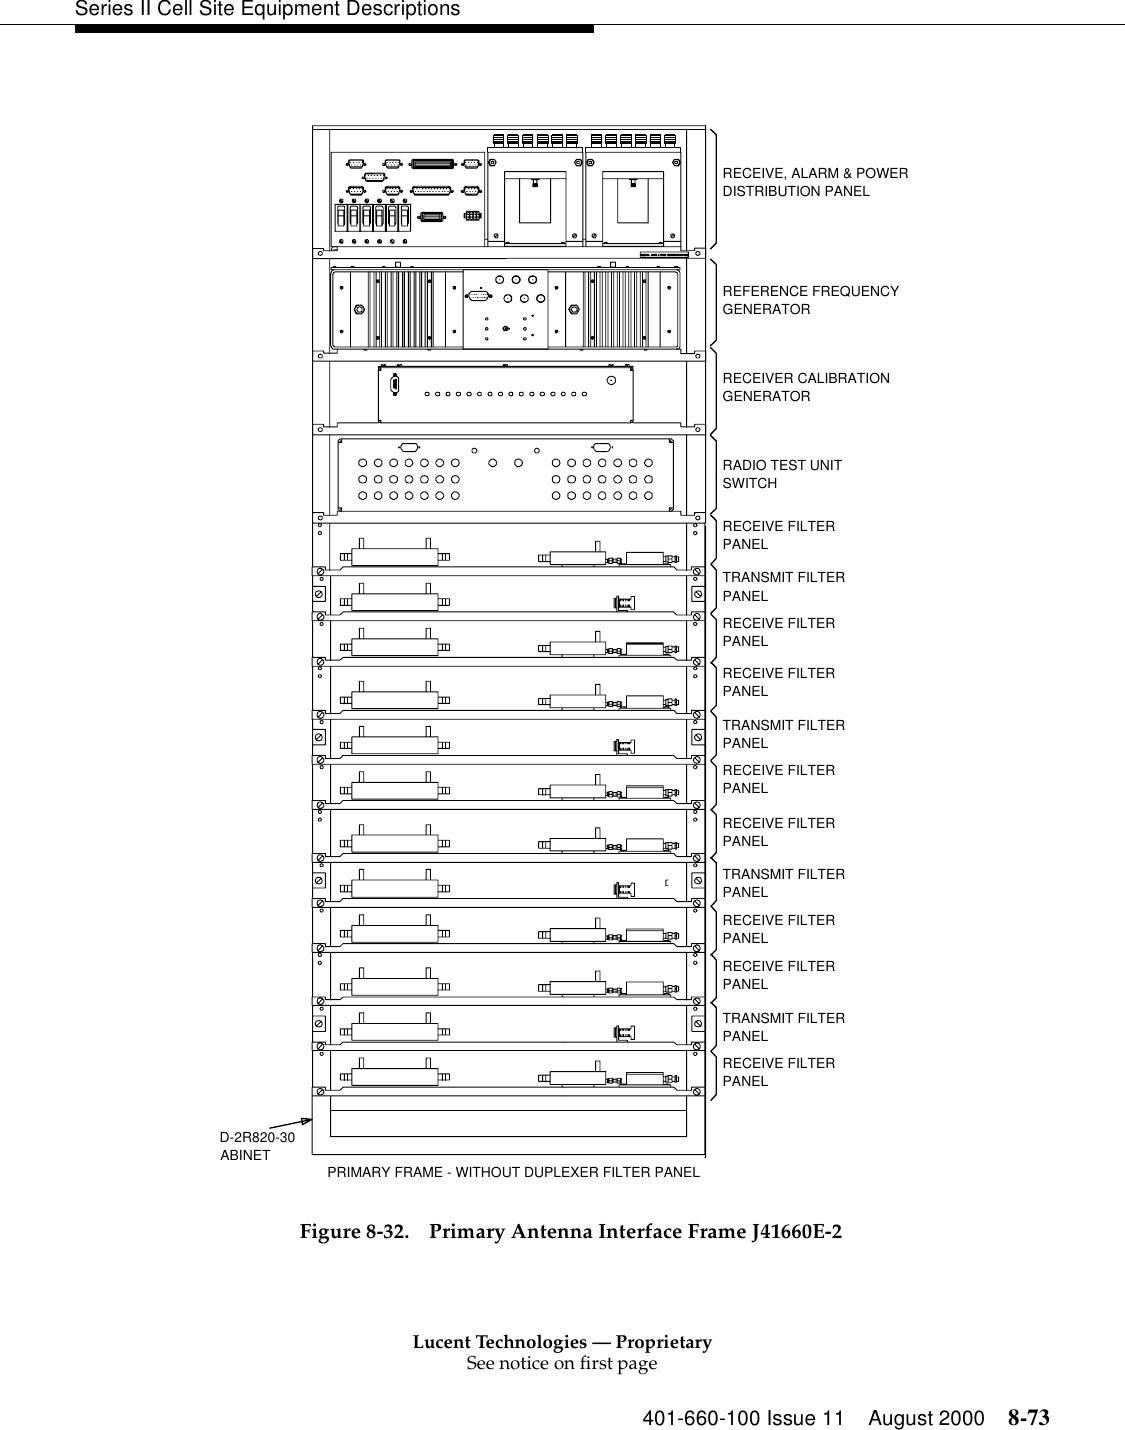 Lucent Technologies — ProprietarySee notice on first page401-660-100 Issue 11 August 2000 8-73Series II Cell Site Equipment Descriptions Figure 8-32. Primary Antenna Interface Frame J41660E-2PANELPANELRECEIVE FILTERTRANSMIT FILTERPANELRECEIVE FILTERPANELRECEIVE FILTERPANELPANELRECEIVE FILTERTRANSMIT FILTERPANELD-2R820-30ABINETPANELRECEIVE FILTERTRANSMIT FILTERPANELRECEIVE FILTERRADIO TEST UNITRECEIVE FILTERRECEIVE FILTERTRANSMIT FILTERREFERENCE FREQUENCYRECEIVER CALIBRATIONRECEIVE, ALARM &amp; POWERDISTRIBUTION PANELGENERATORGENERATORSWITCHPANELPANELPANELPRIMARY FRAME - WITHOUT DUPLEXER FILTER PANEL